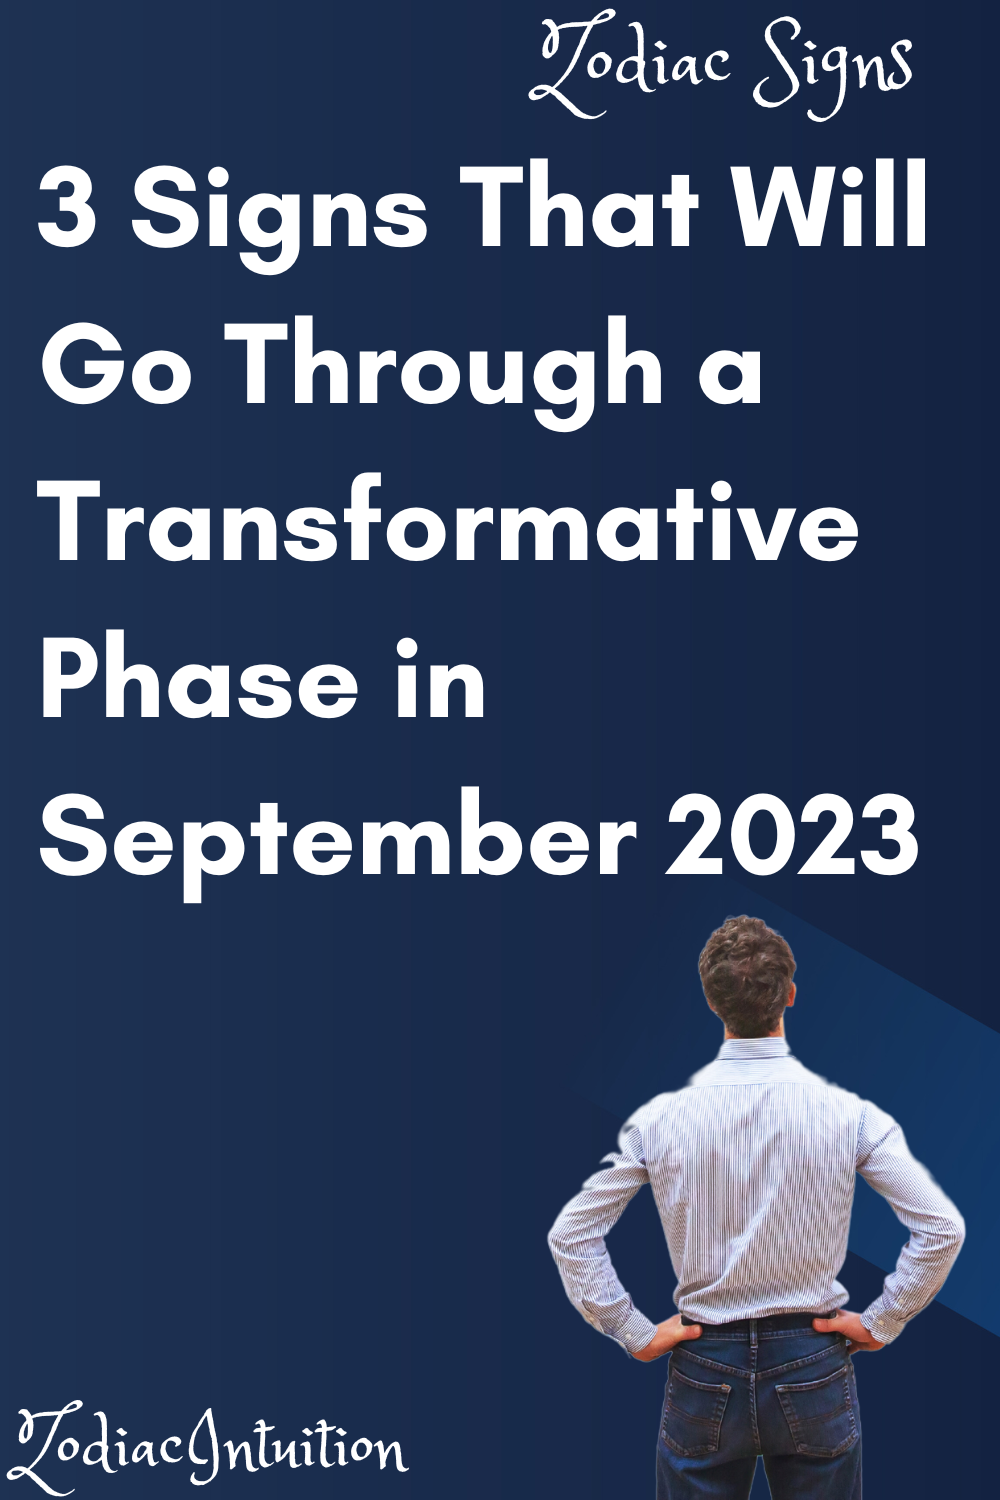 3 Signs That Will Go Through a Transformative Phase in September 2023